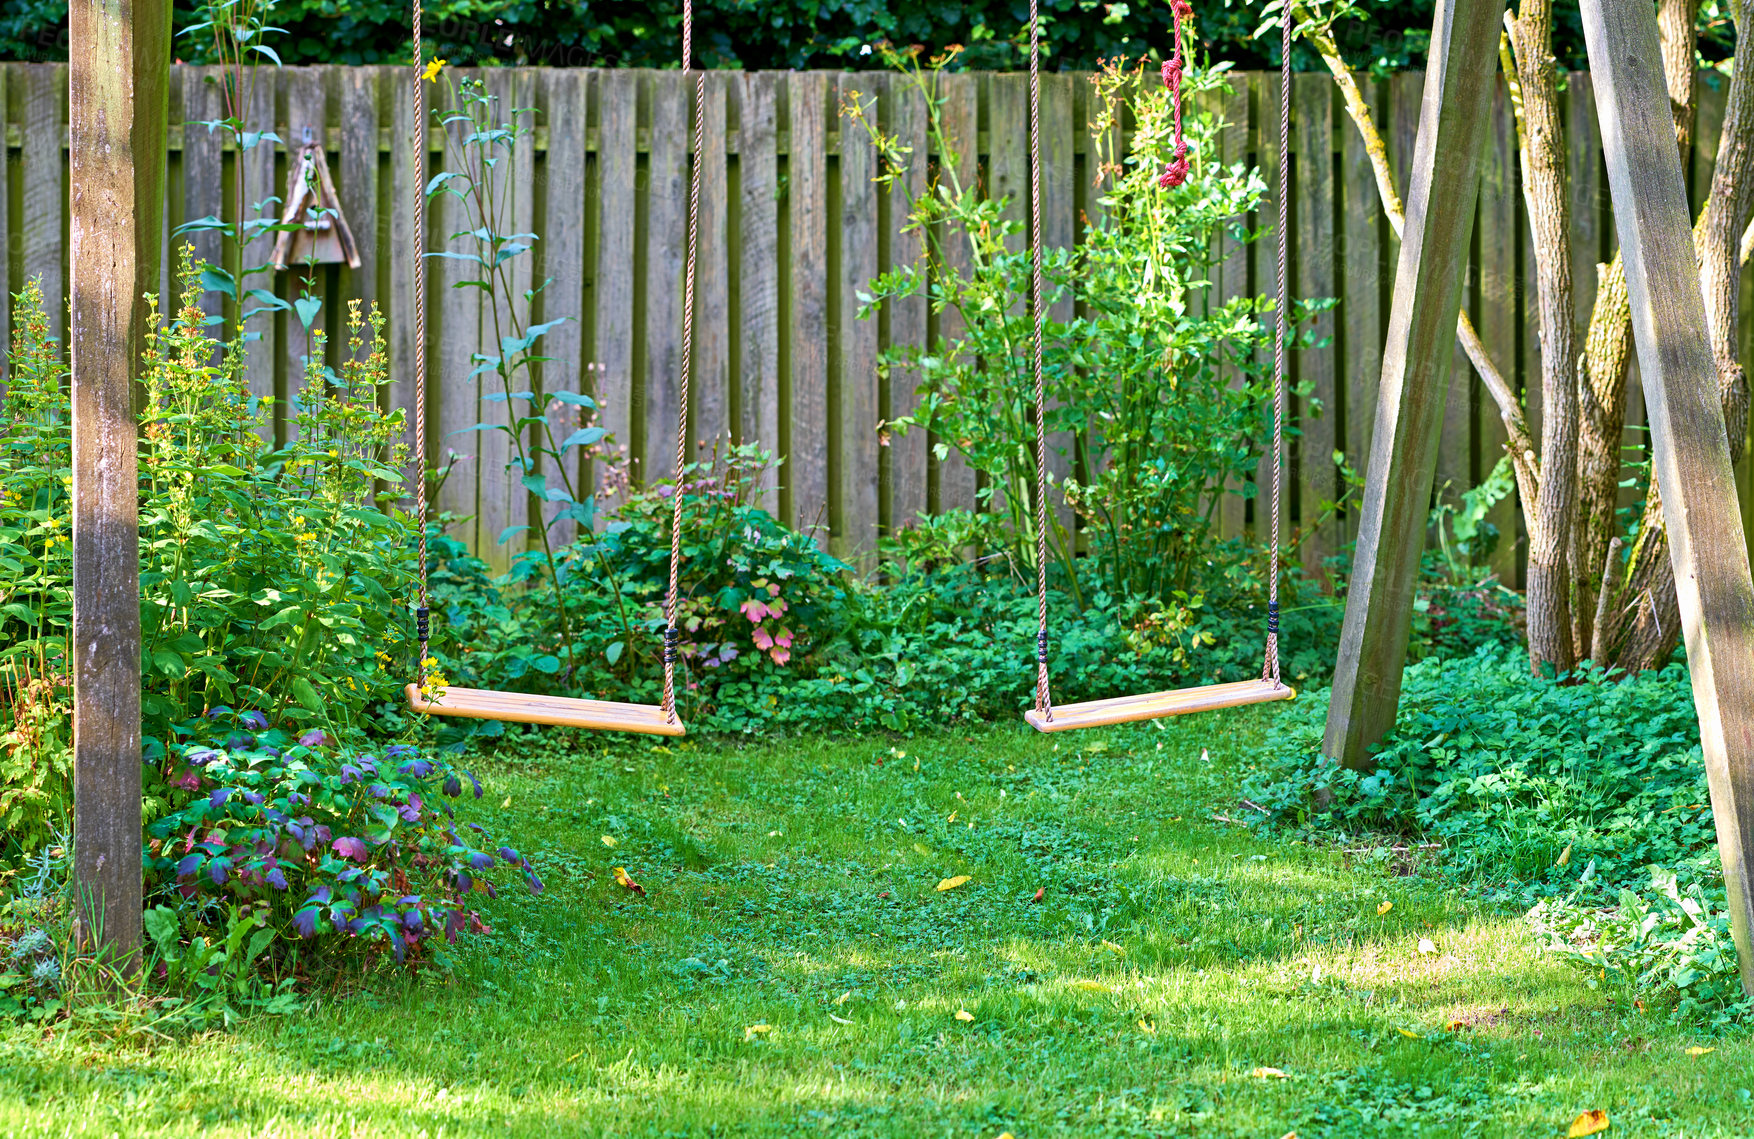 Buy stock photo Two fun garden swings in a private and secluded, lush home garden. Rope and wooden swing set to enjoy carefee and playful activity on summer day.  Serene, peaceful, zen, quiet yard with fresh plants 